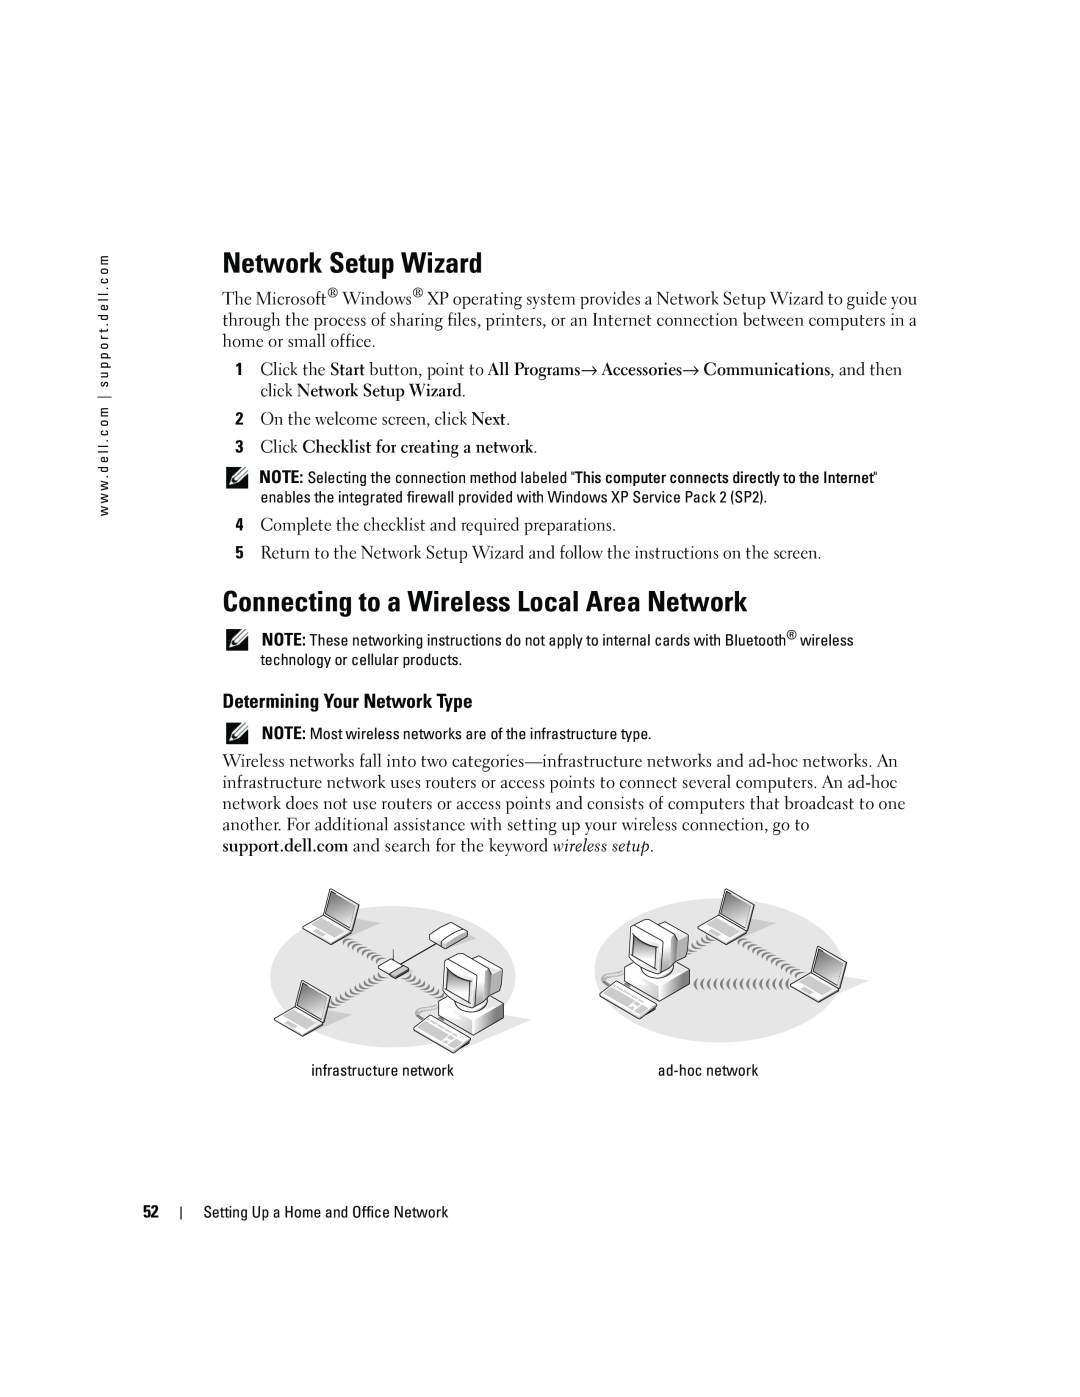 Dell 9300 owner manual Network Setup Wizard, Connecting to a Wireless Local Area Network, Determining Your Network Type 